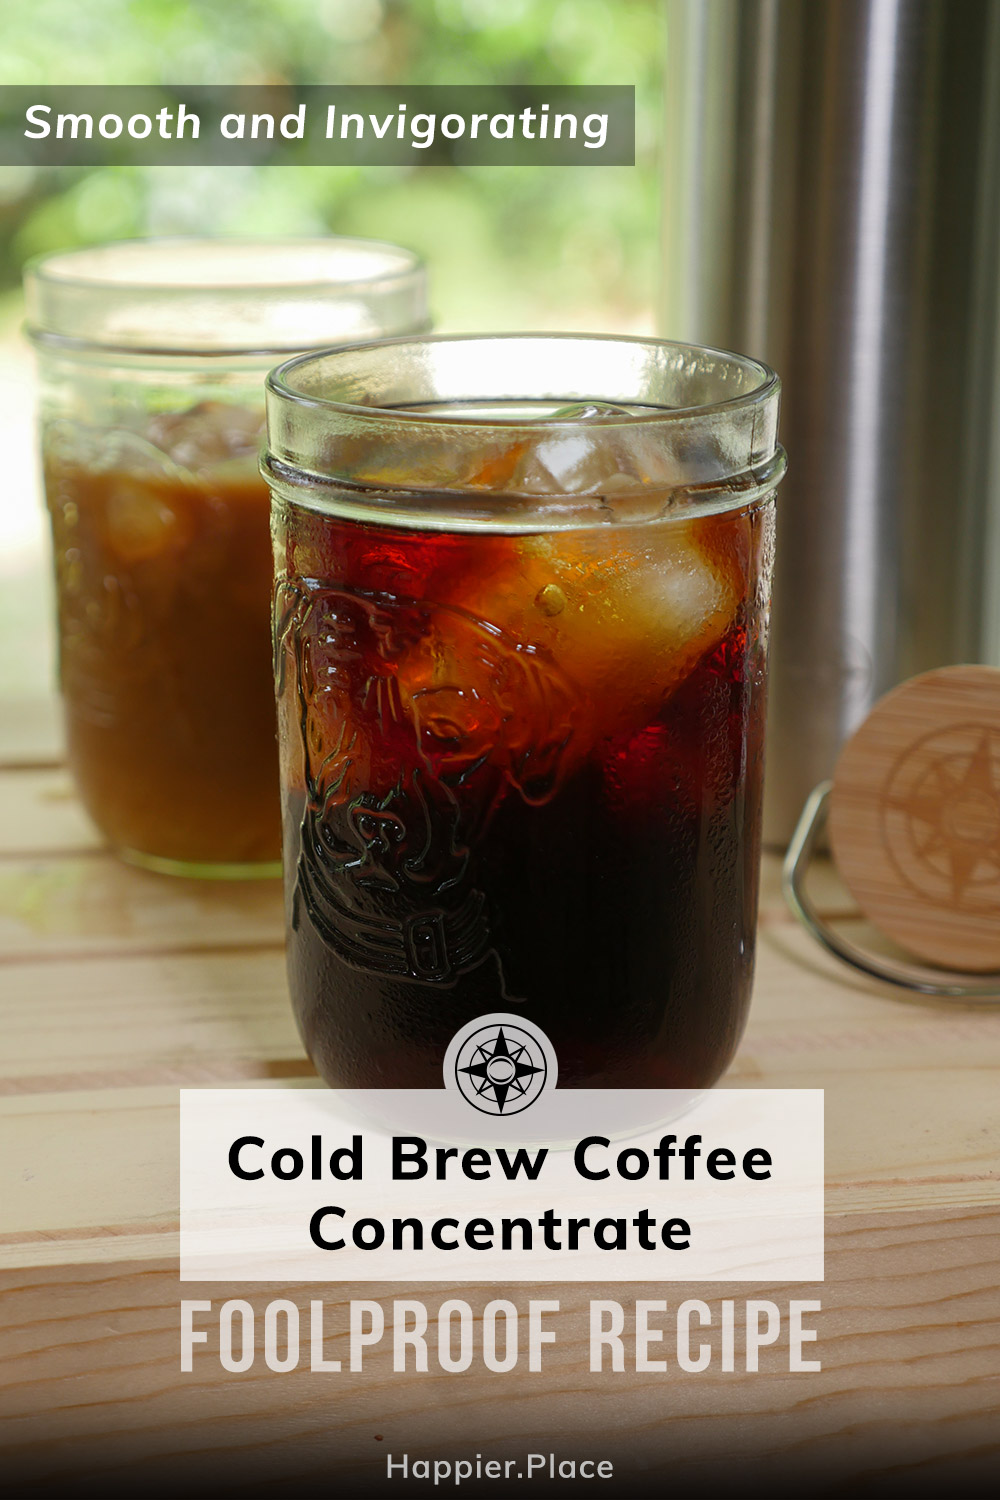 Foolproof cold brew coffee concentrate recipe - smooth and invigorating! Brought to you by Happier Place